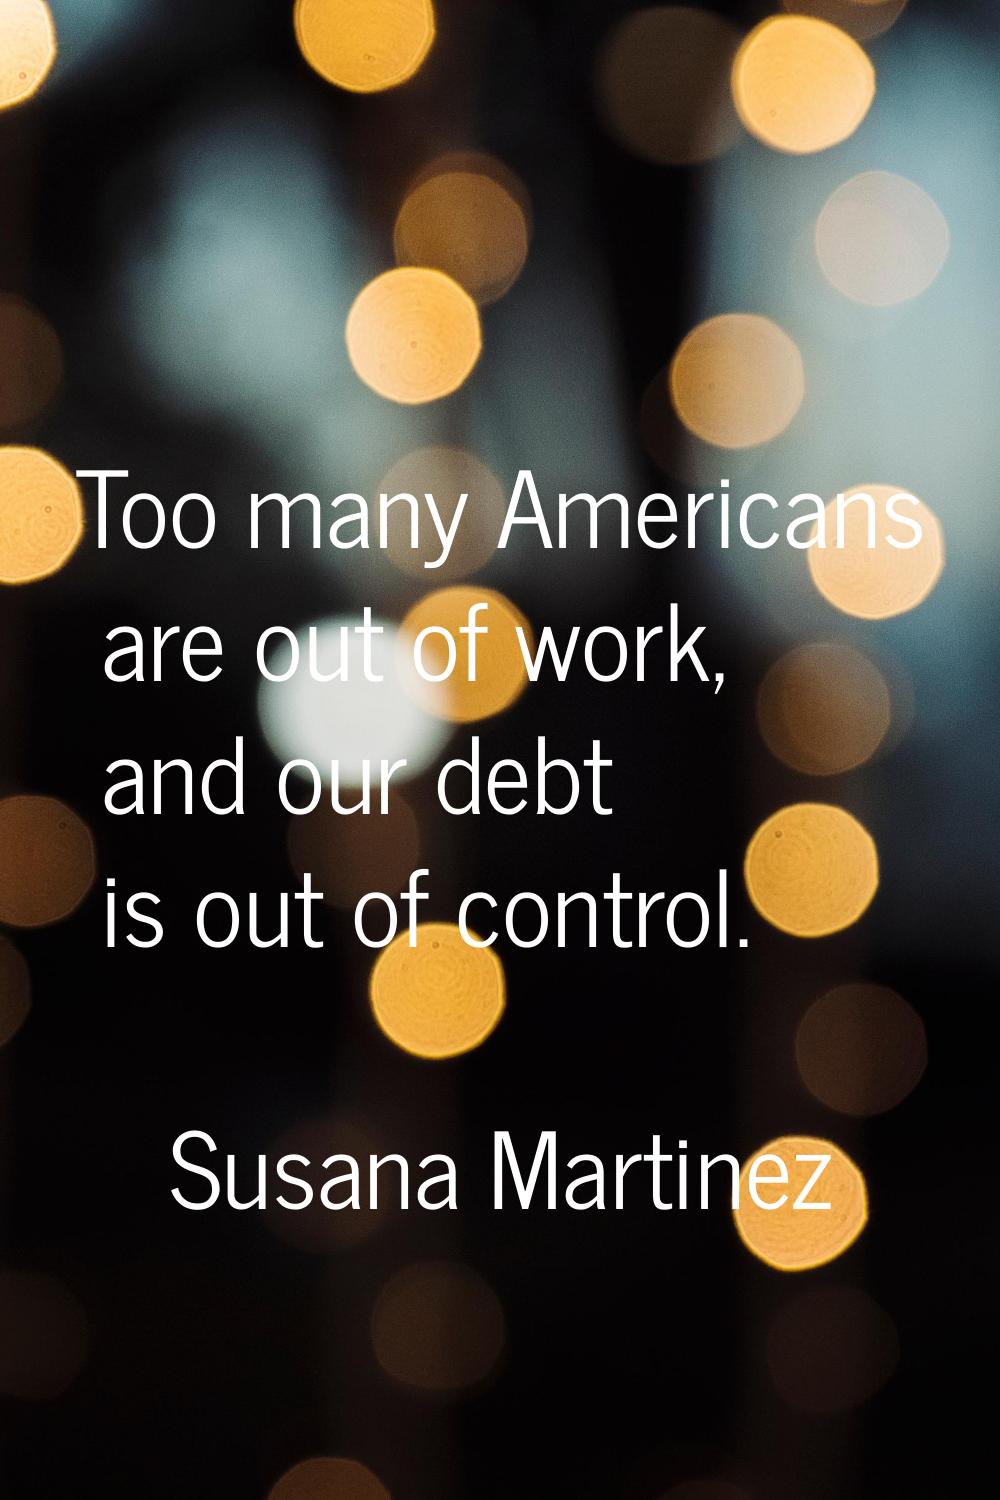 Too many Americans are out of work, and our debt is out of control.